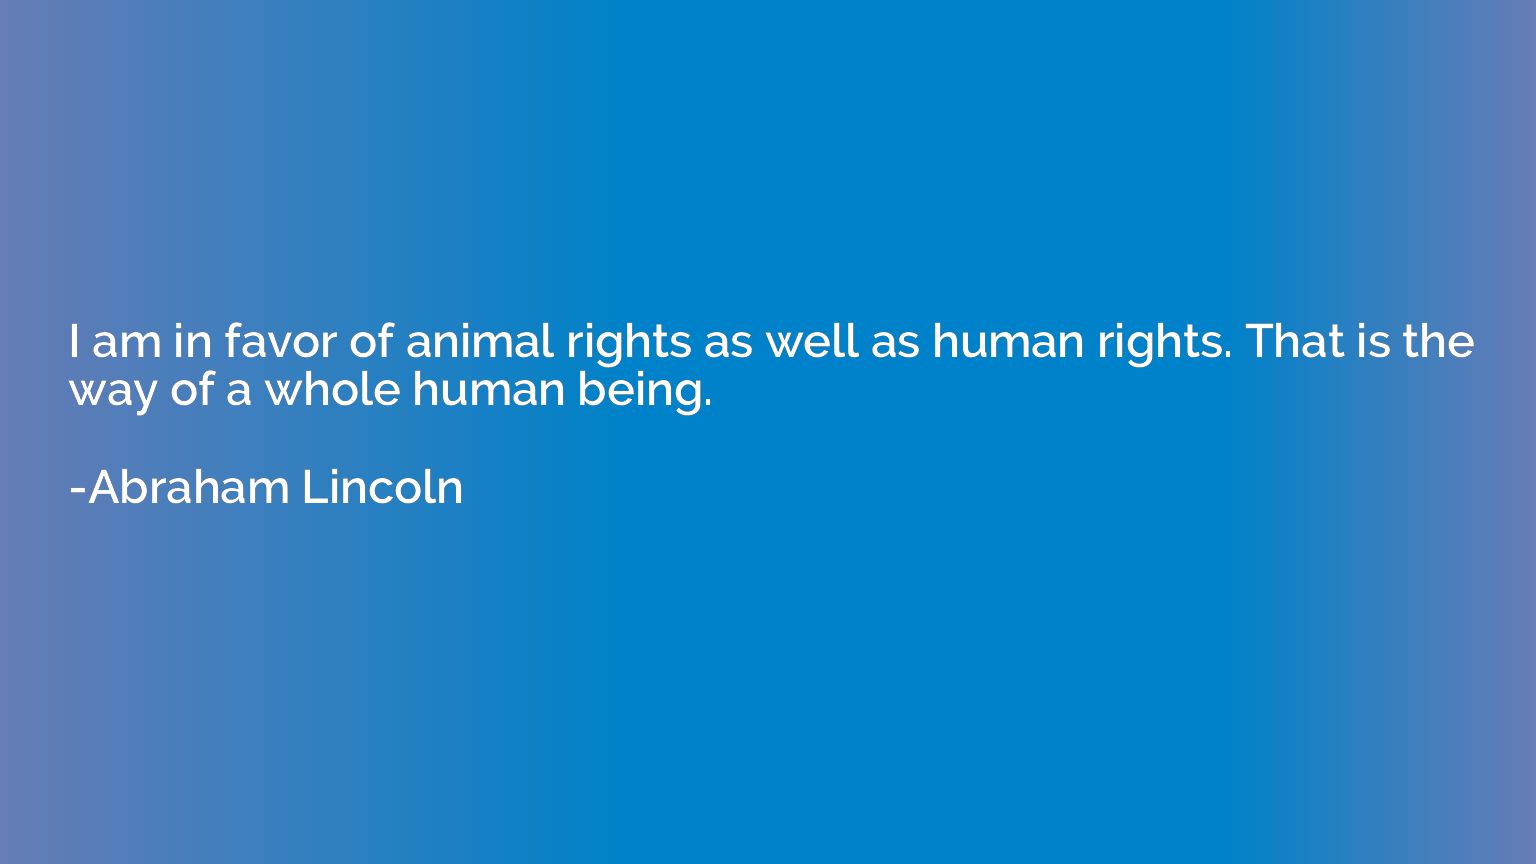 I am in favor of animal rights as well as human rights. That